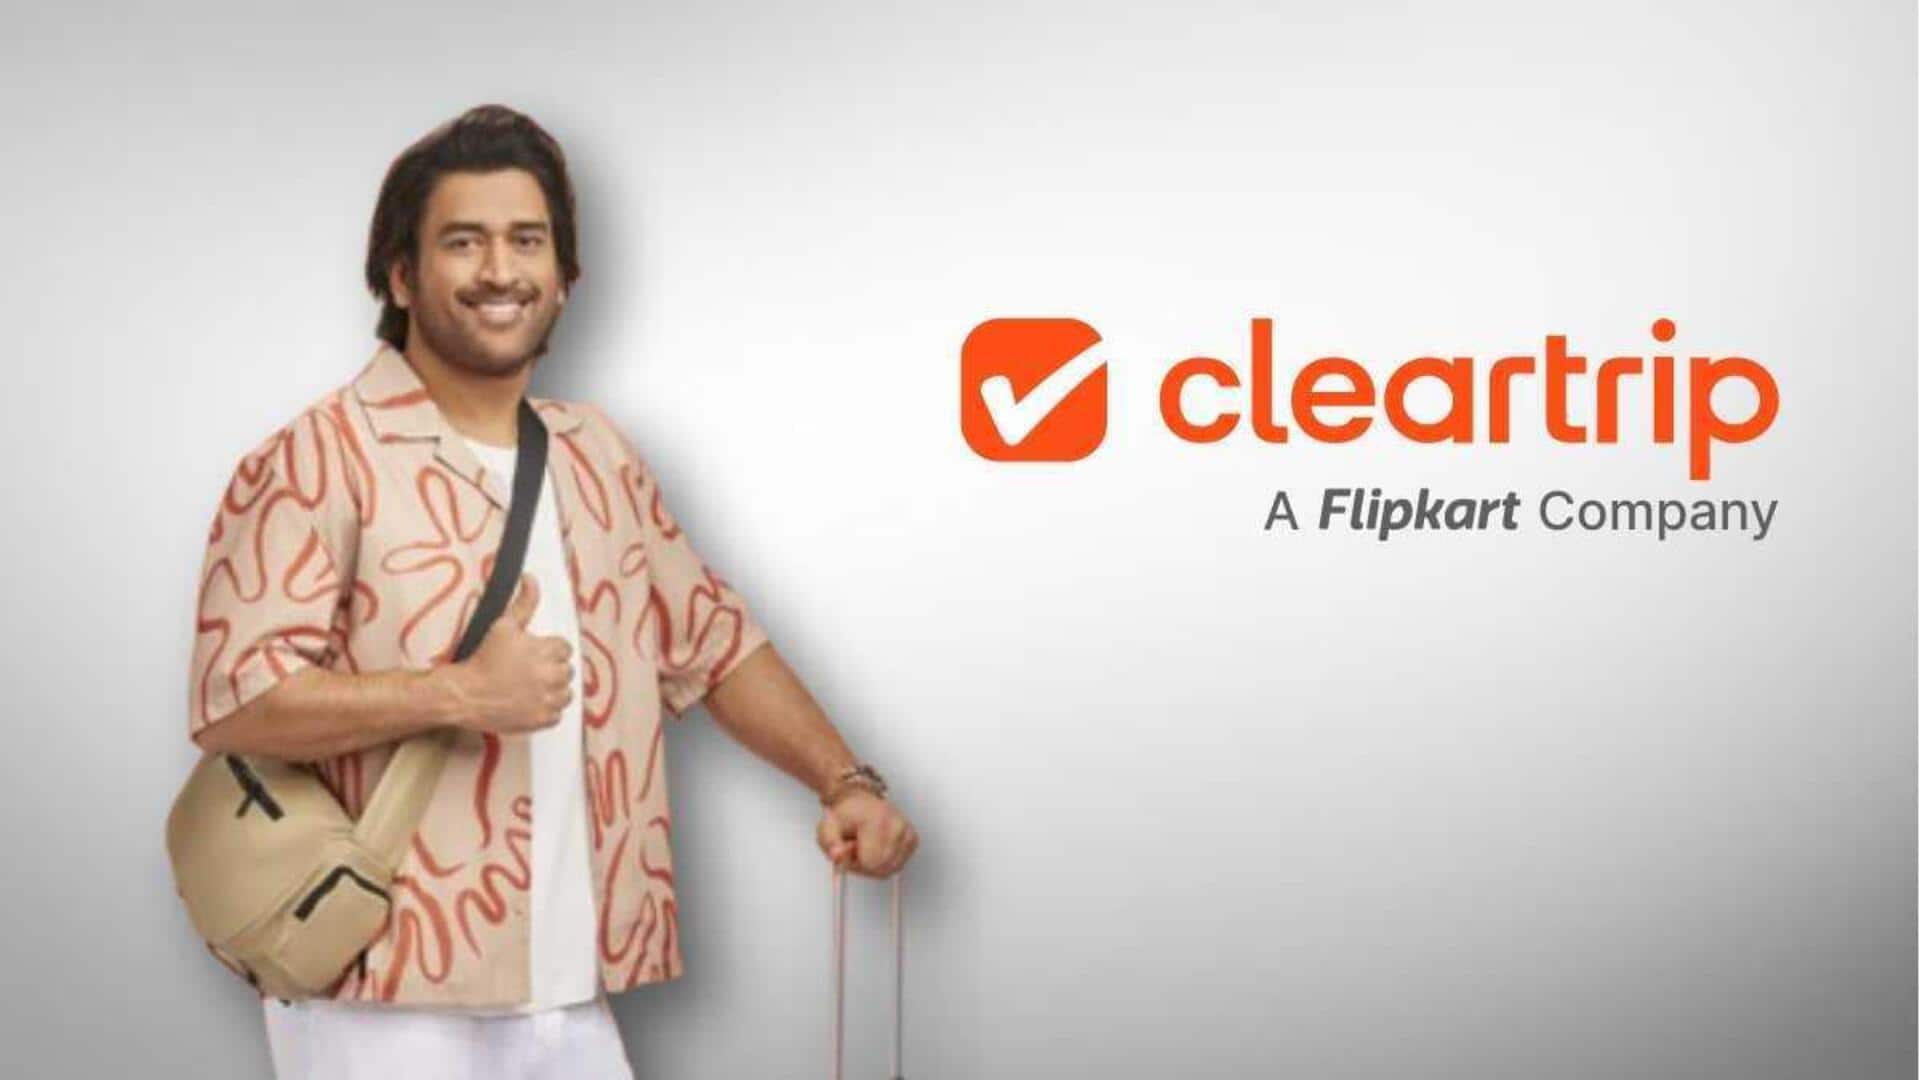 MS Dhoni announced as brand ambassador for Cleartrip